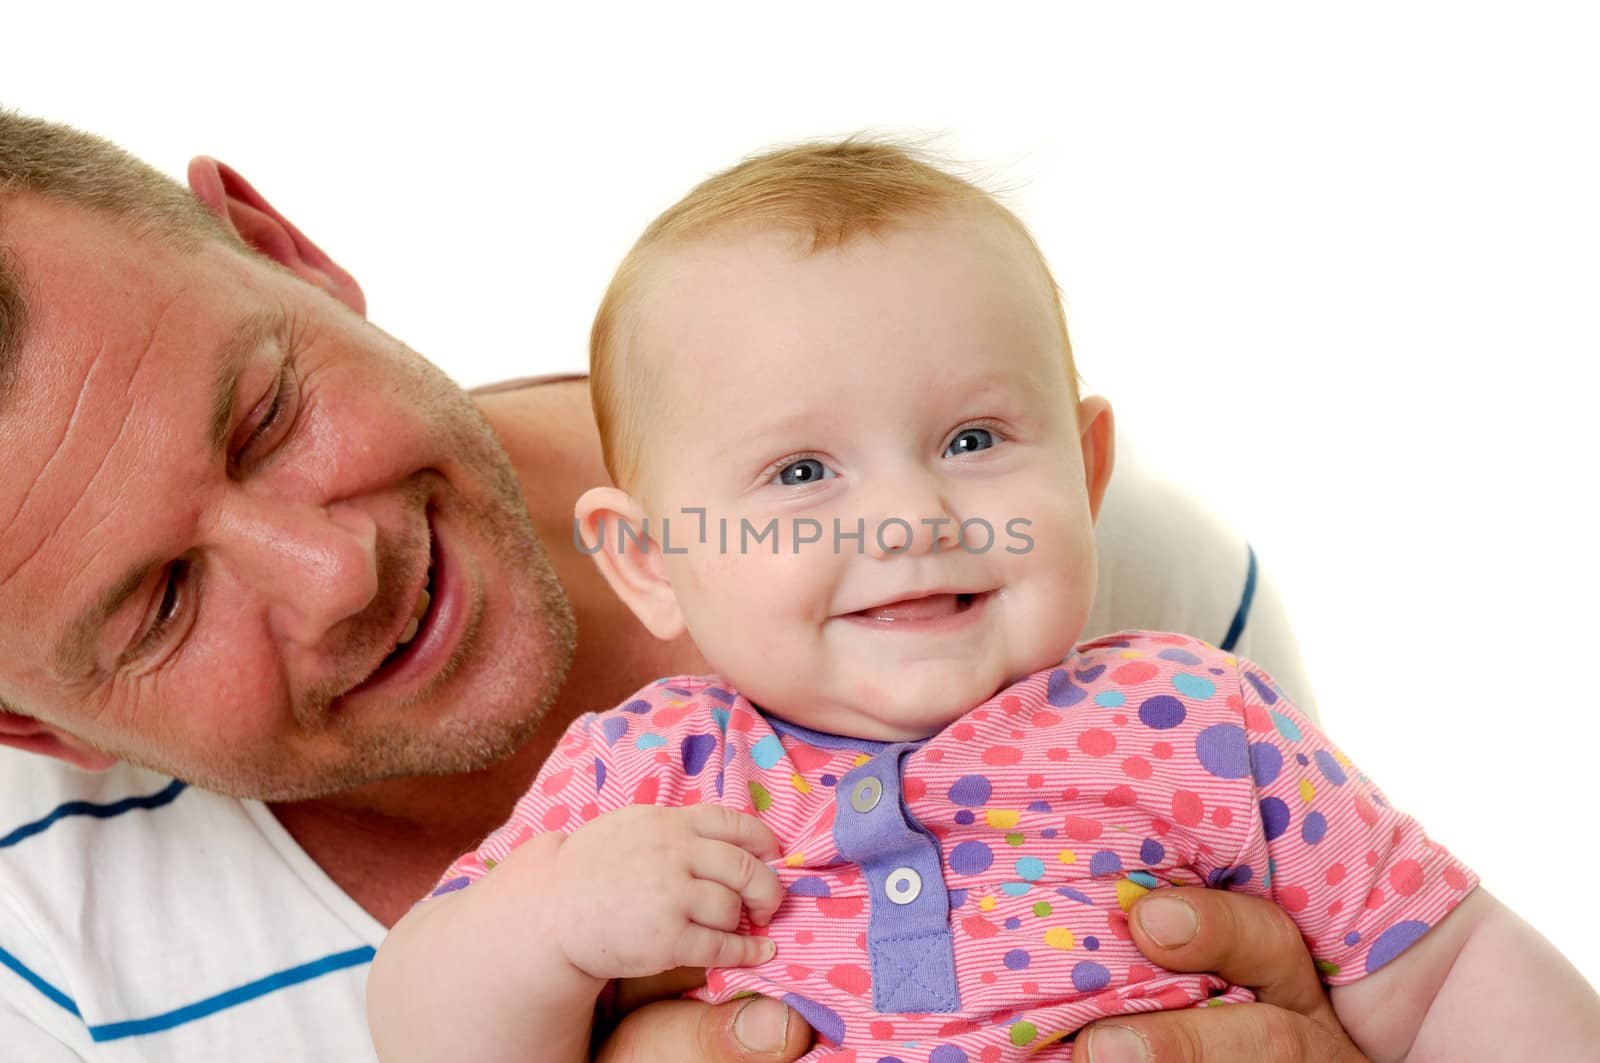 Happy and smiling baby and father. The baby 3 month old. Isolated on a white background.